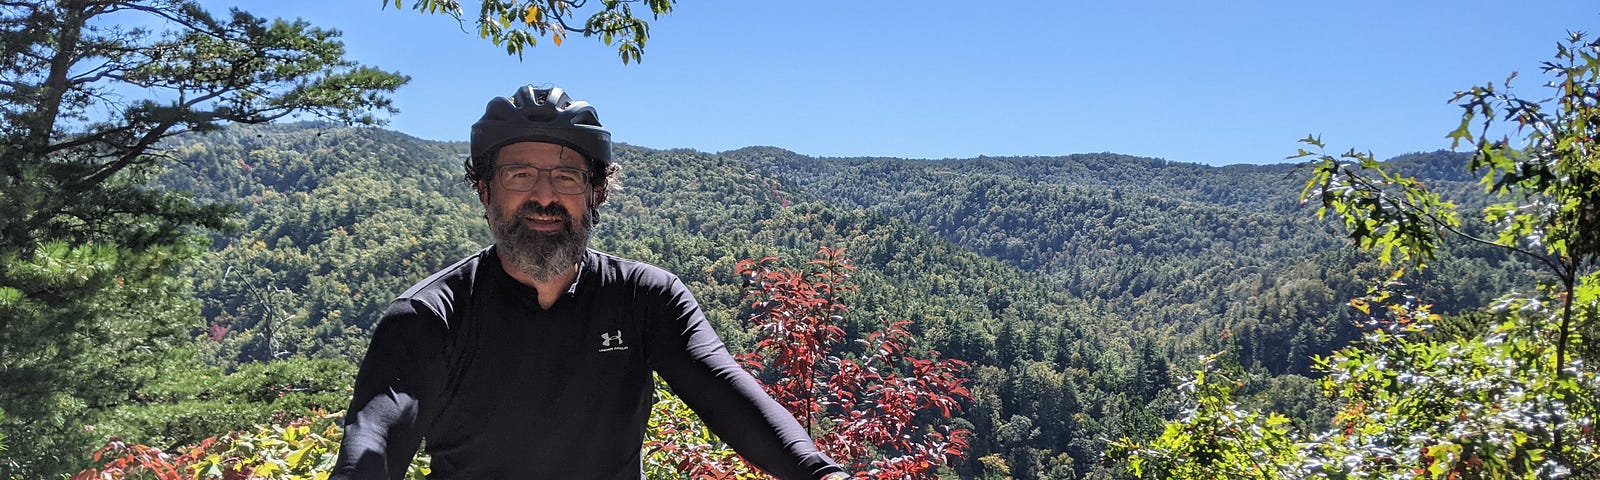 This shows a man with his bike in front of a forest.